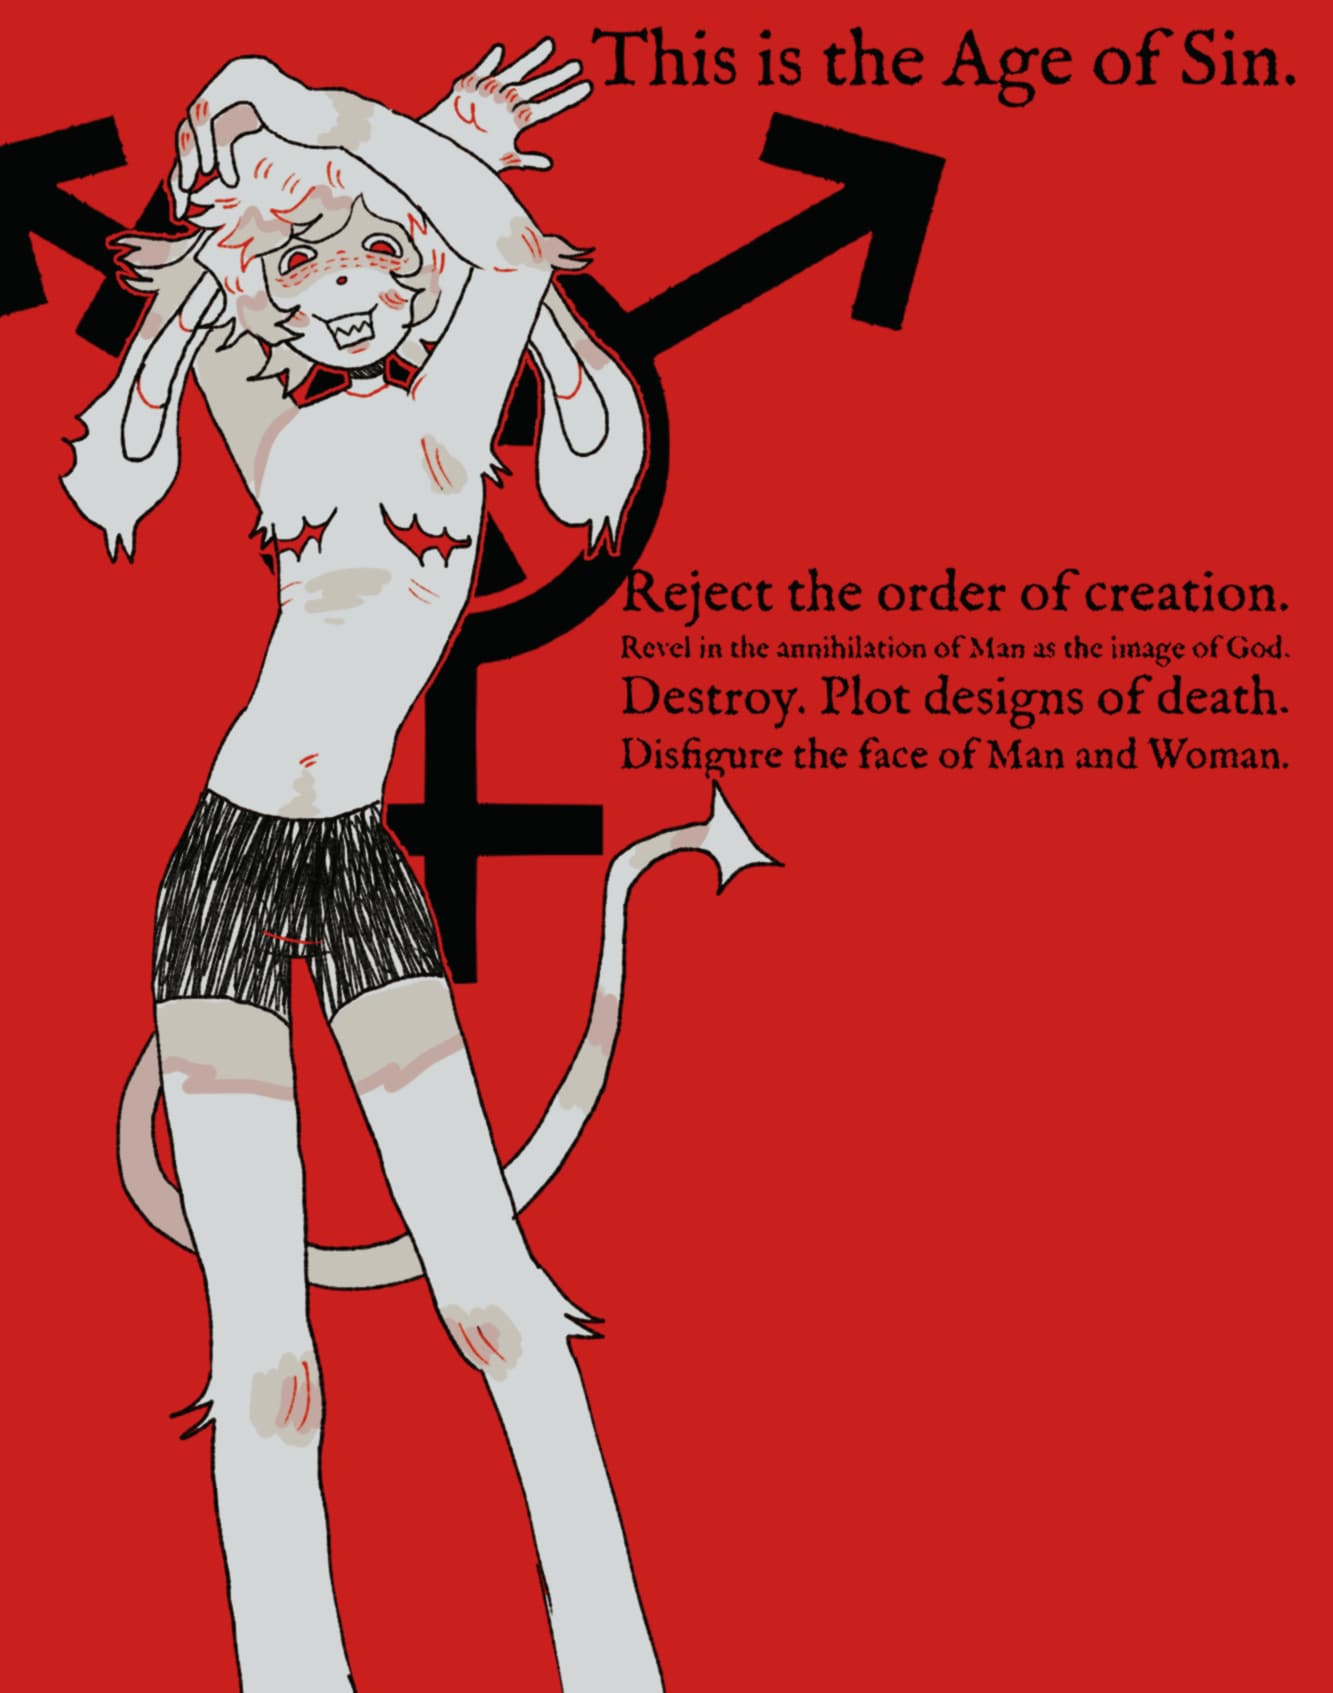 Art of an anthro character with top surgery scars, grinning menacingly down at the viewer, with text next to it about rejecting God for the sake of self-expression